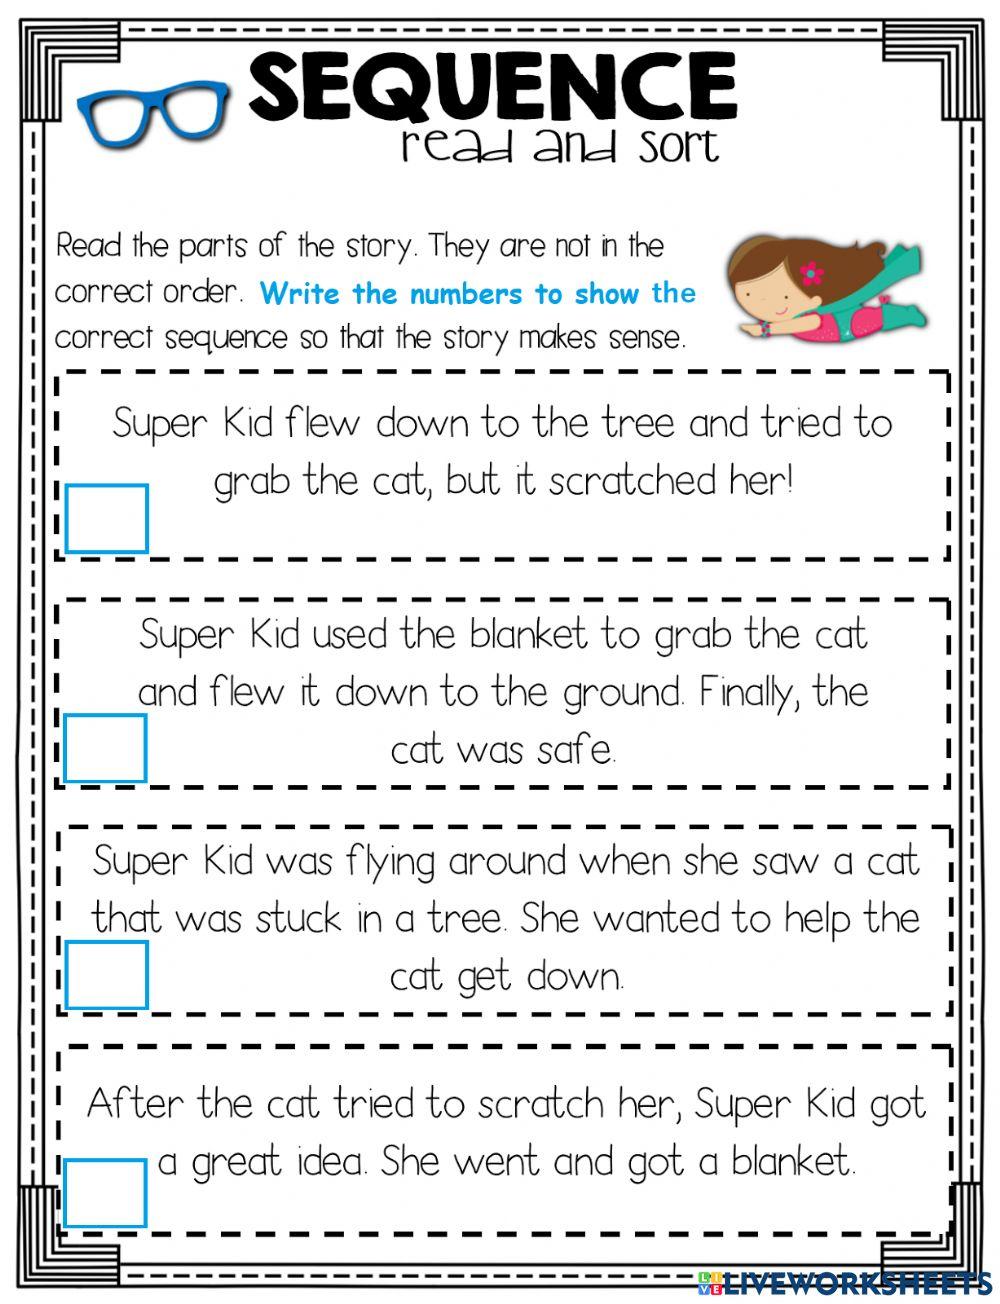 Sequencing events